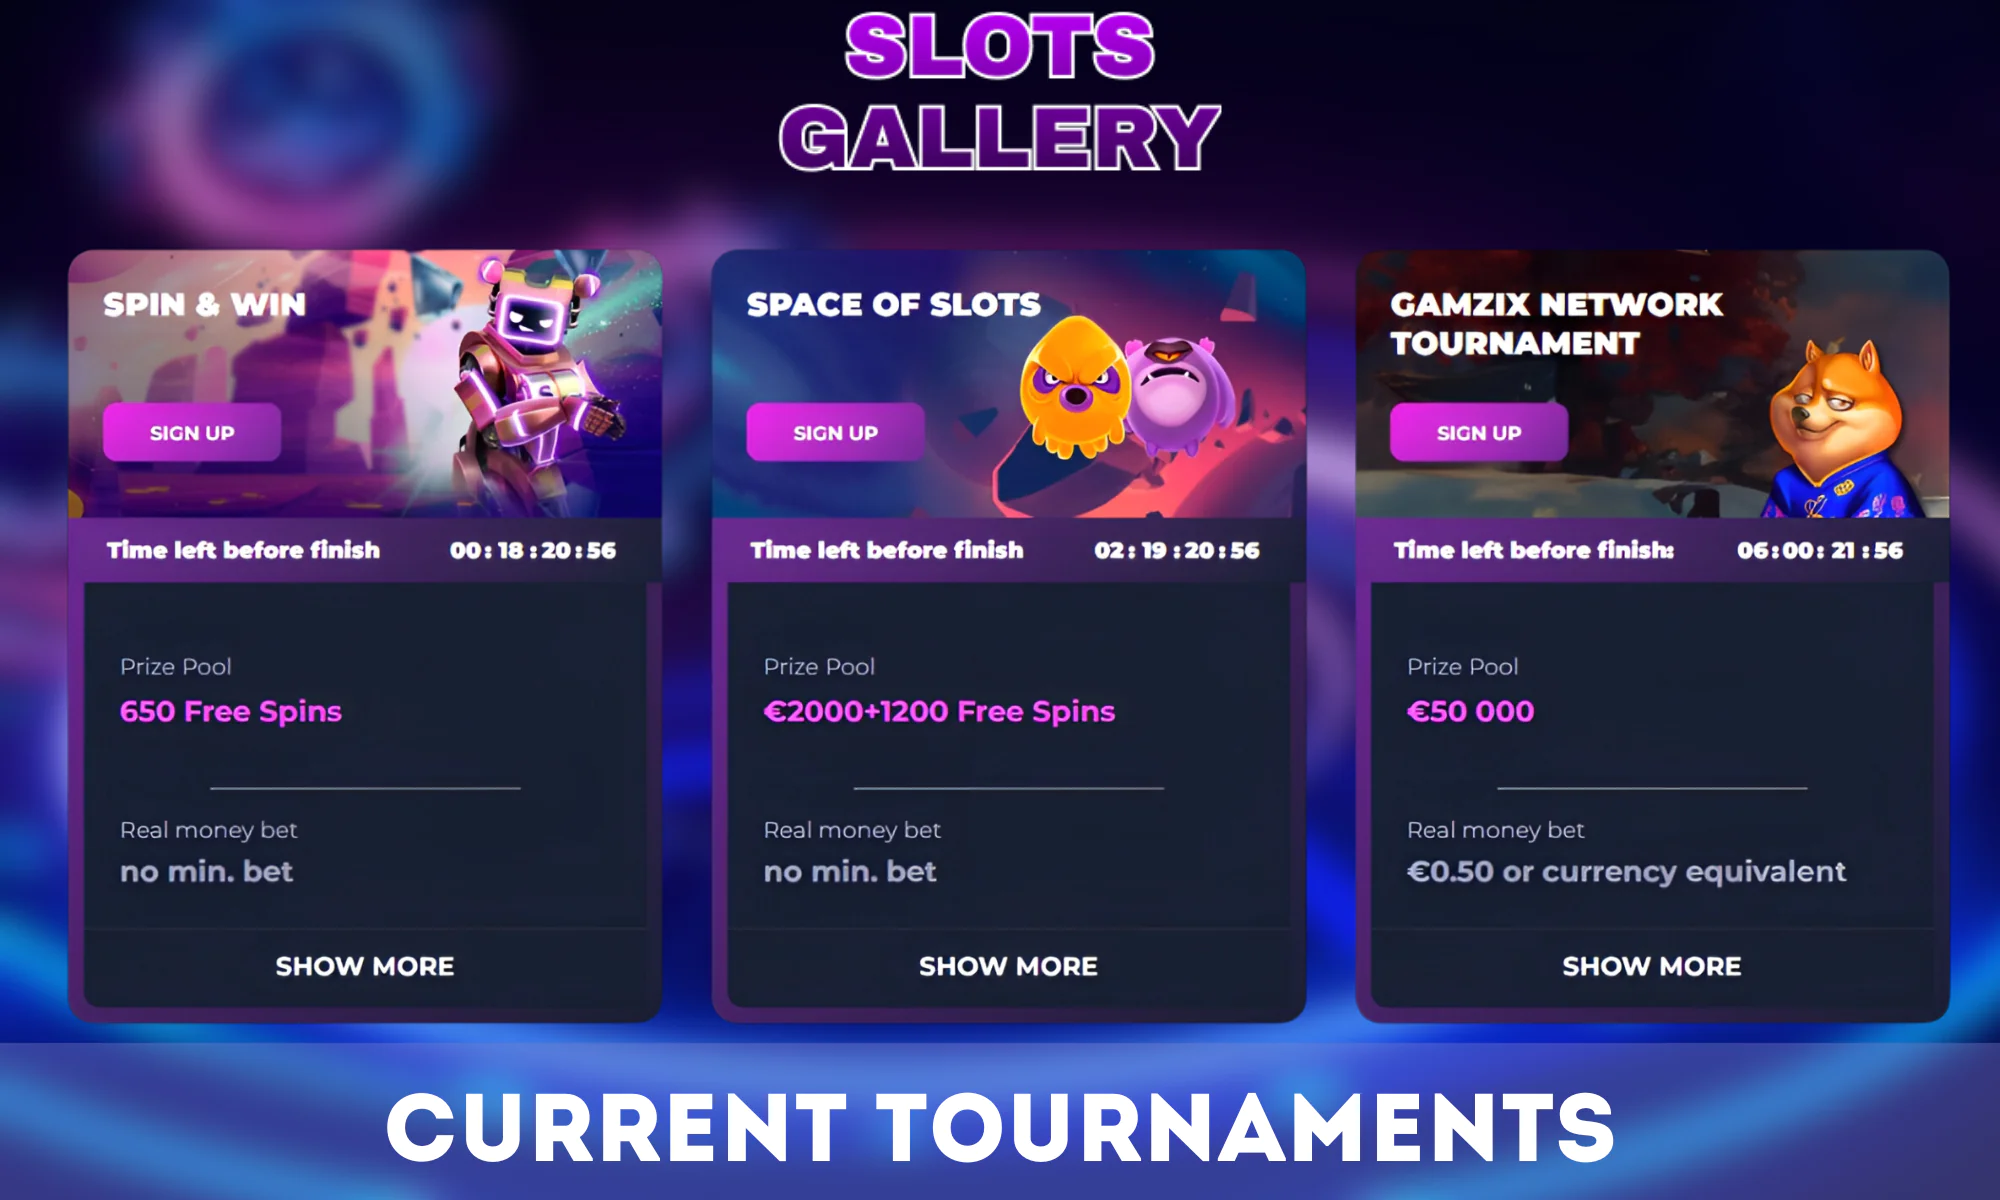 Slots Gallery regularly holds various tournaments